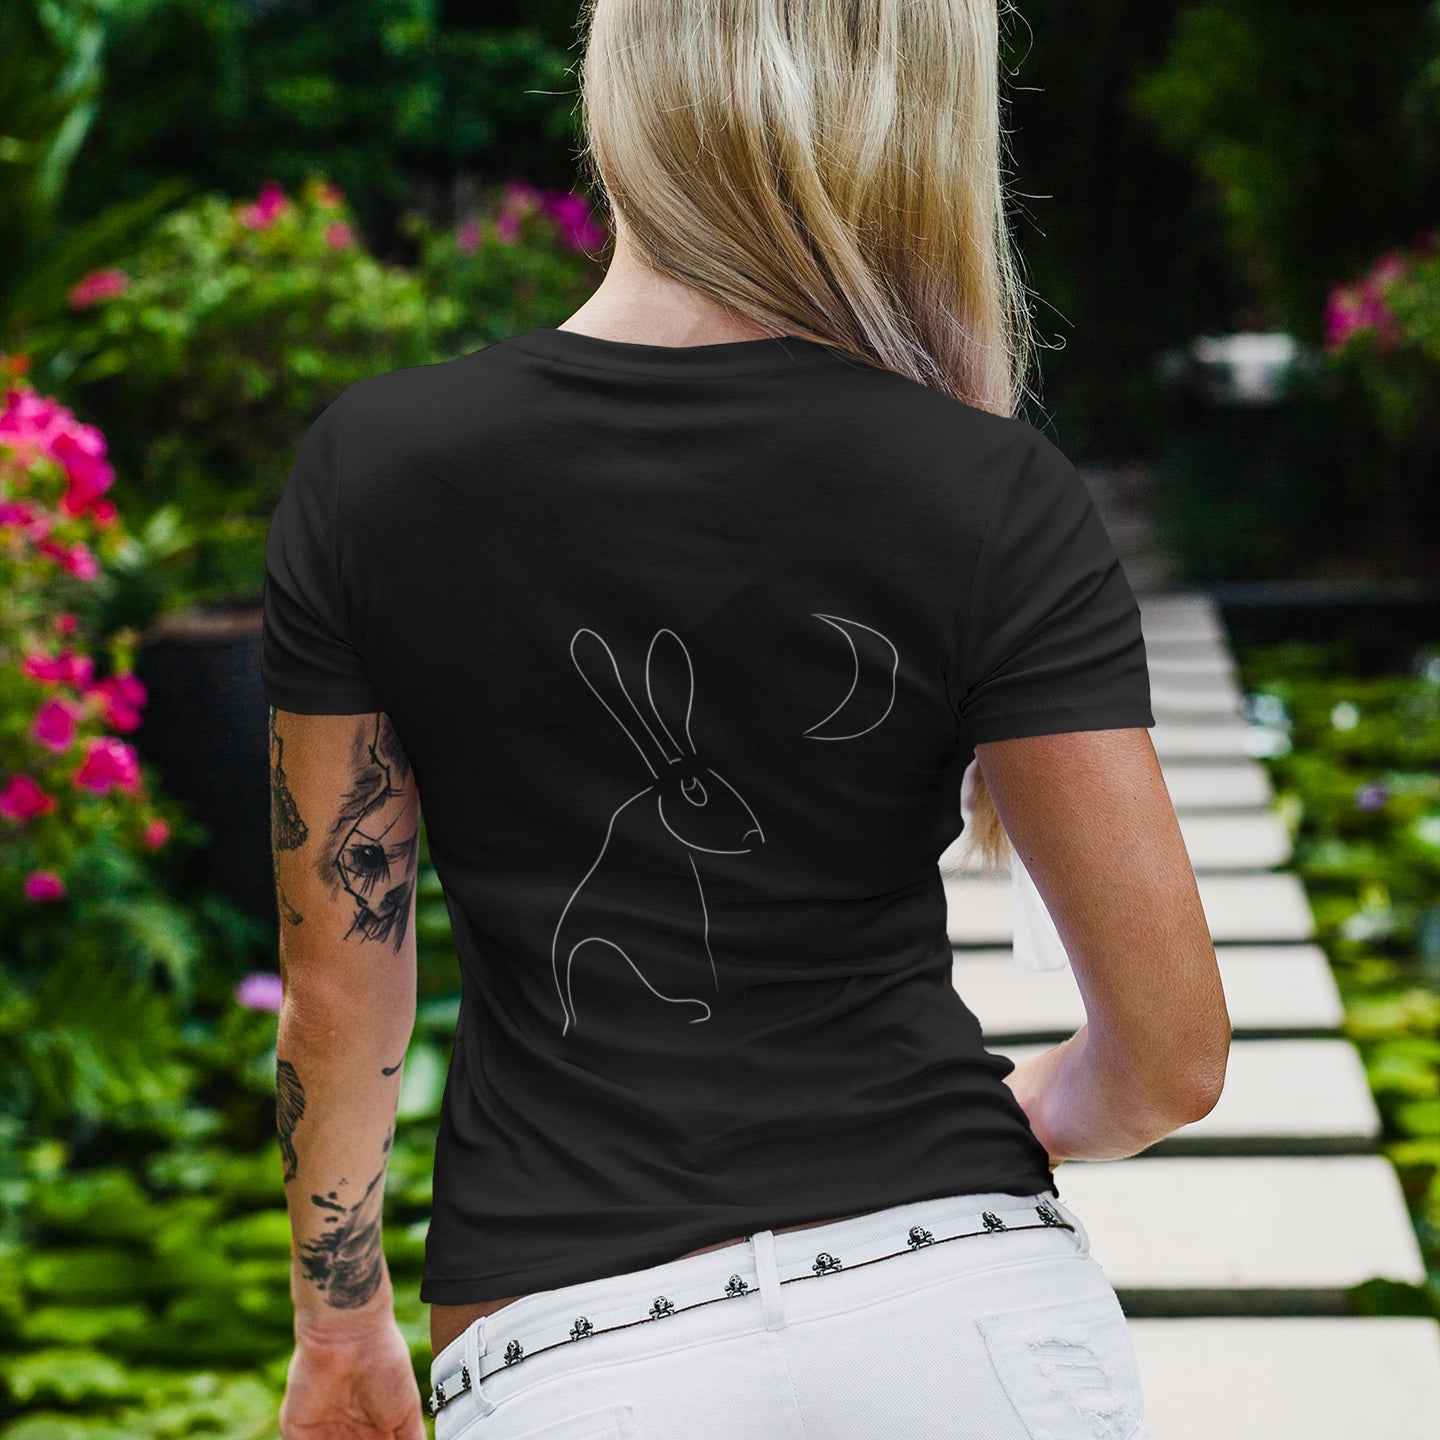 White Hare Stares at Moon | 100% Organic Cotton T Shirt worn by a woman